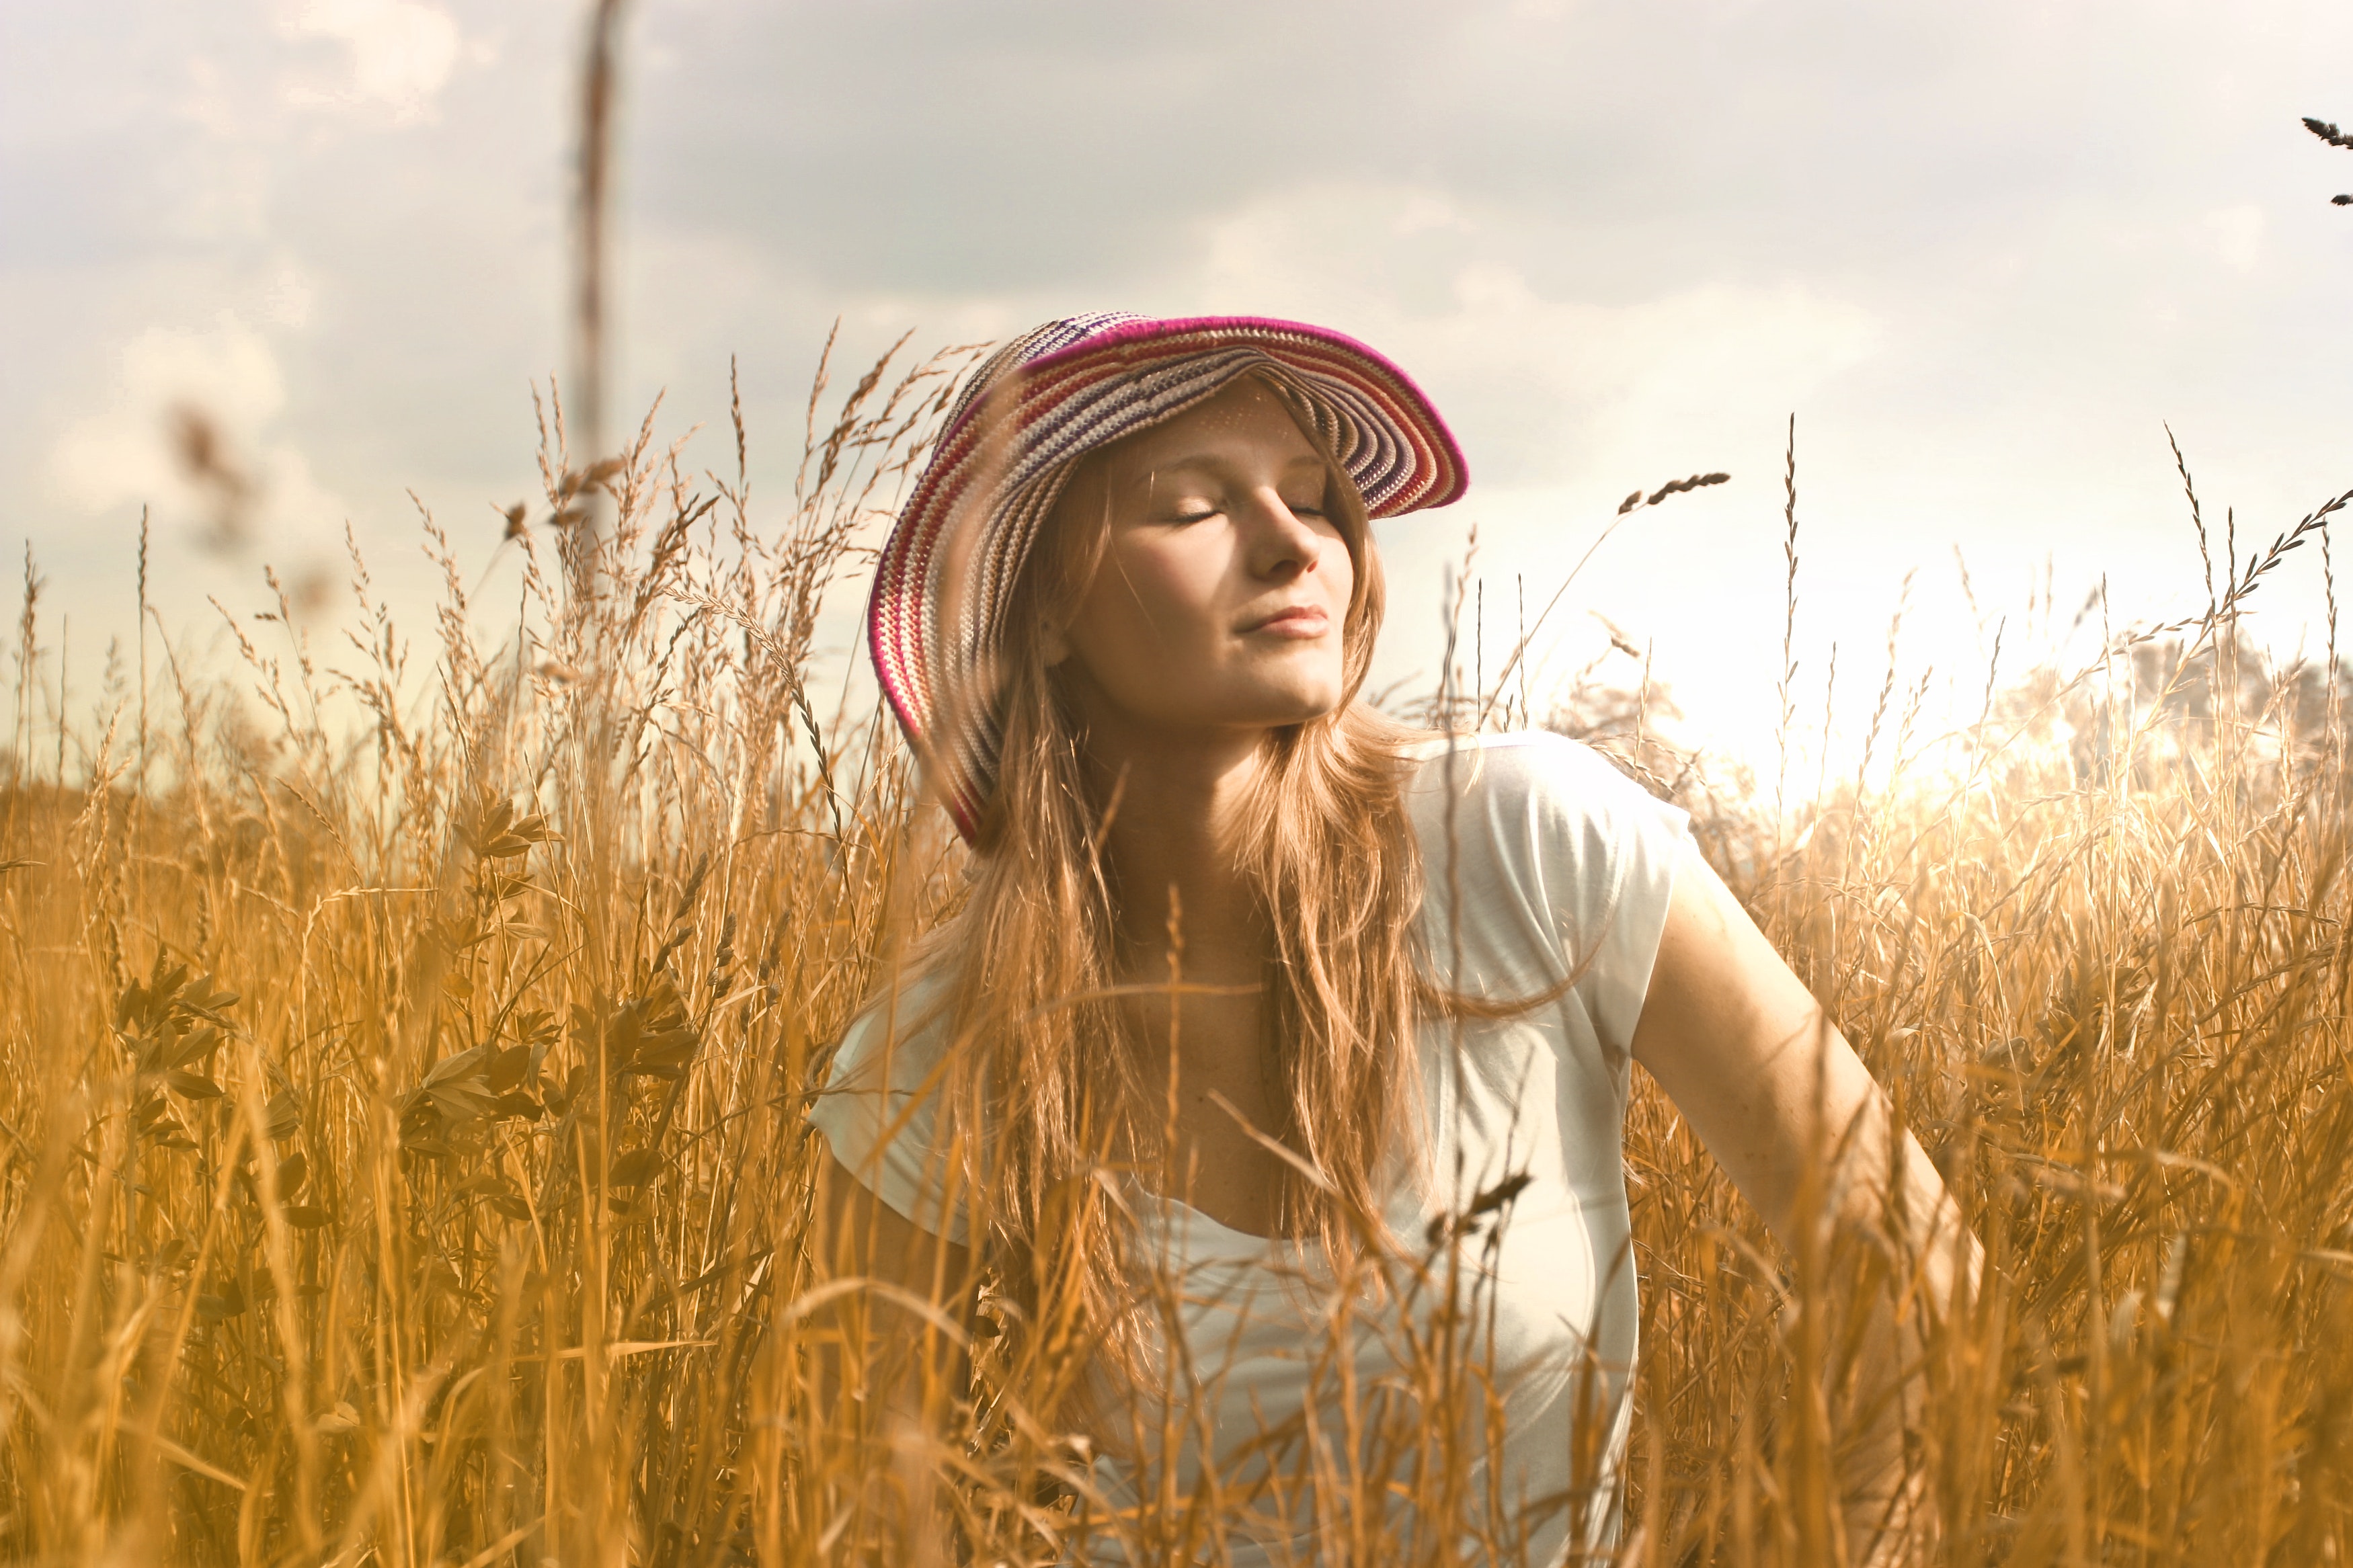 Woman Wearing White Top and Red and White Sunny Hat, Agriculture, Straw, Pleasure, Portrait, HQ Photo